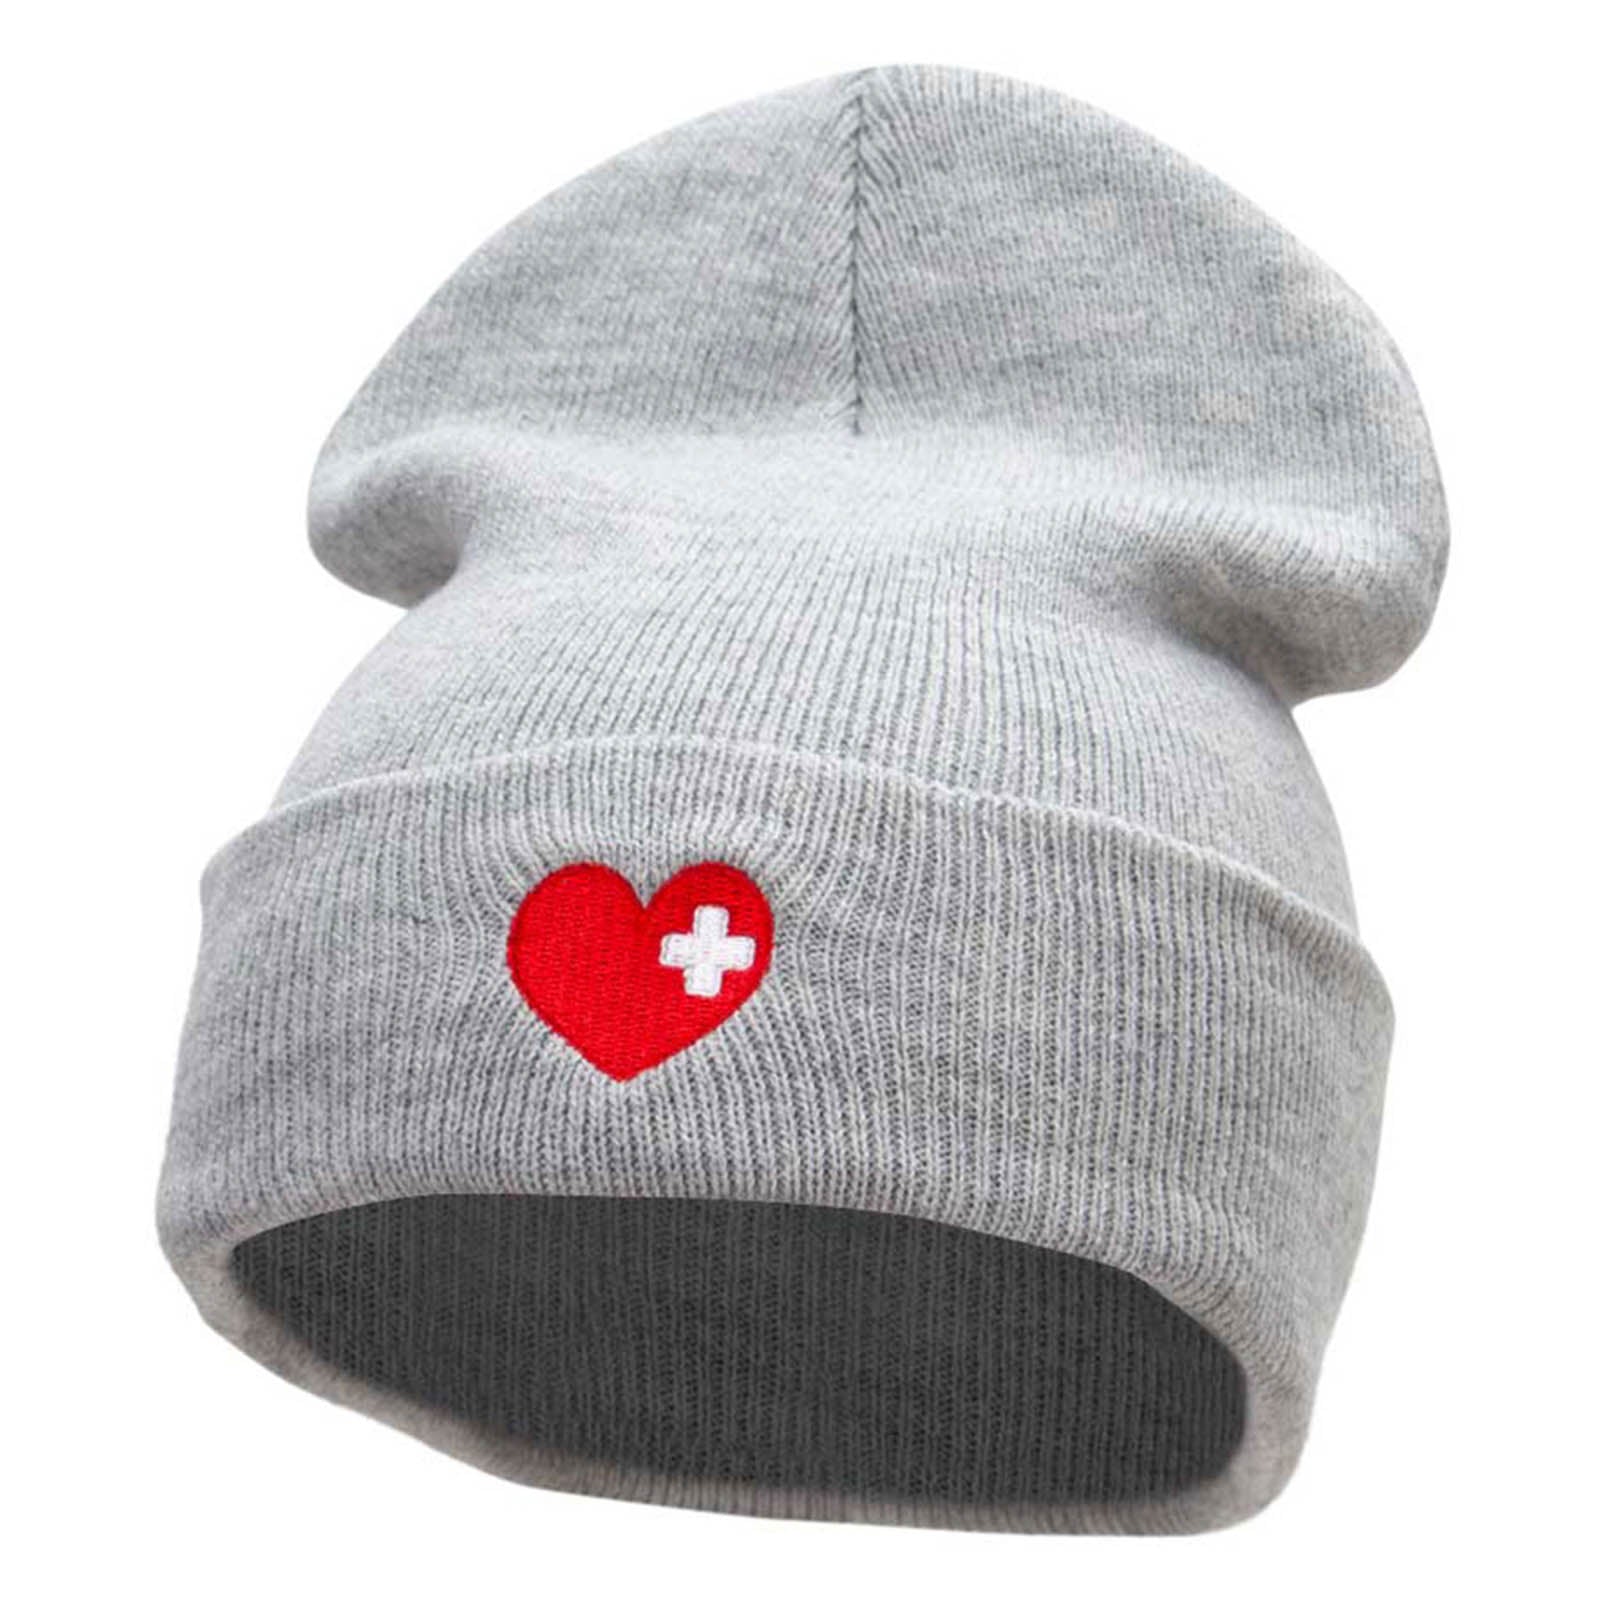 Medical Love Embroidered 12 Inch Long Knitted Beanie - Heather Grey OSFM